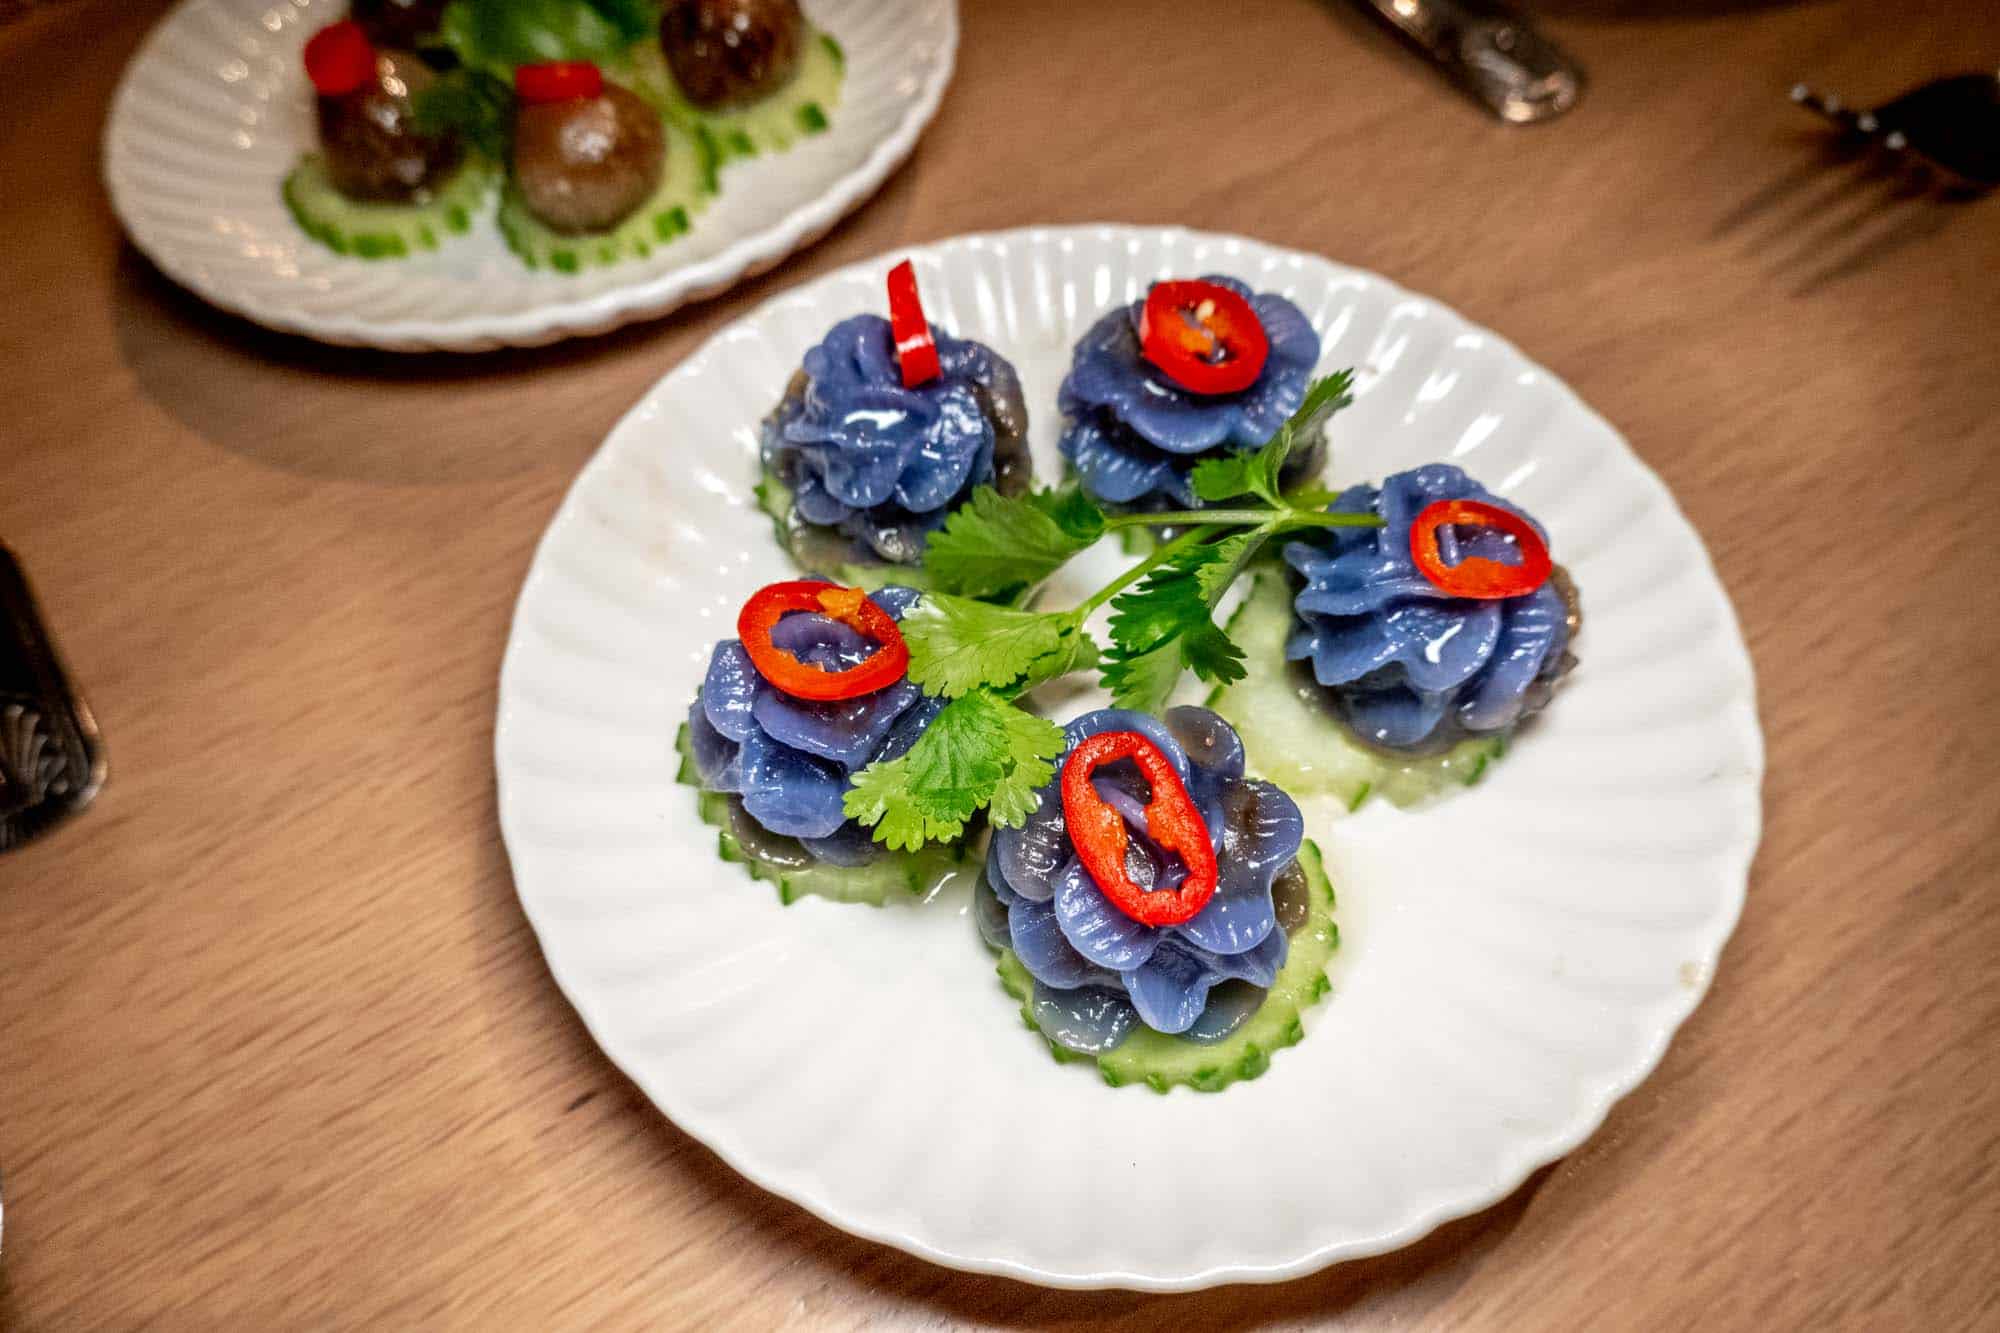 Purple flower dumplings on cucumber topped with red pepper on a white plate.